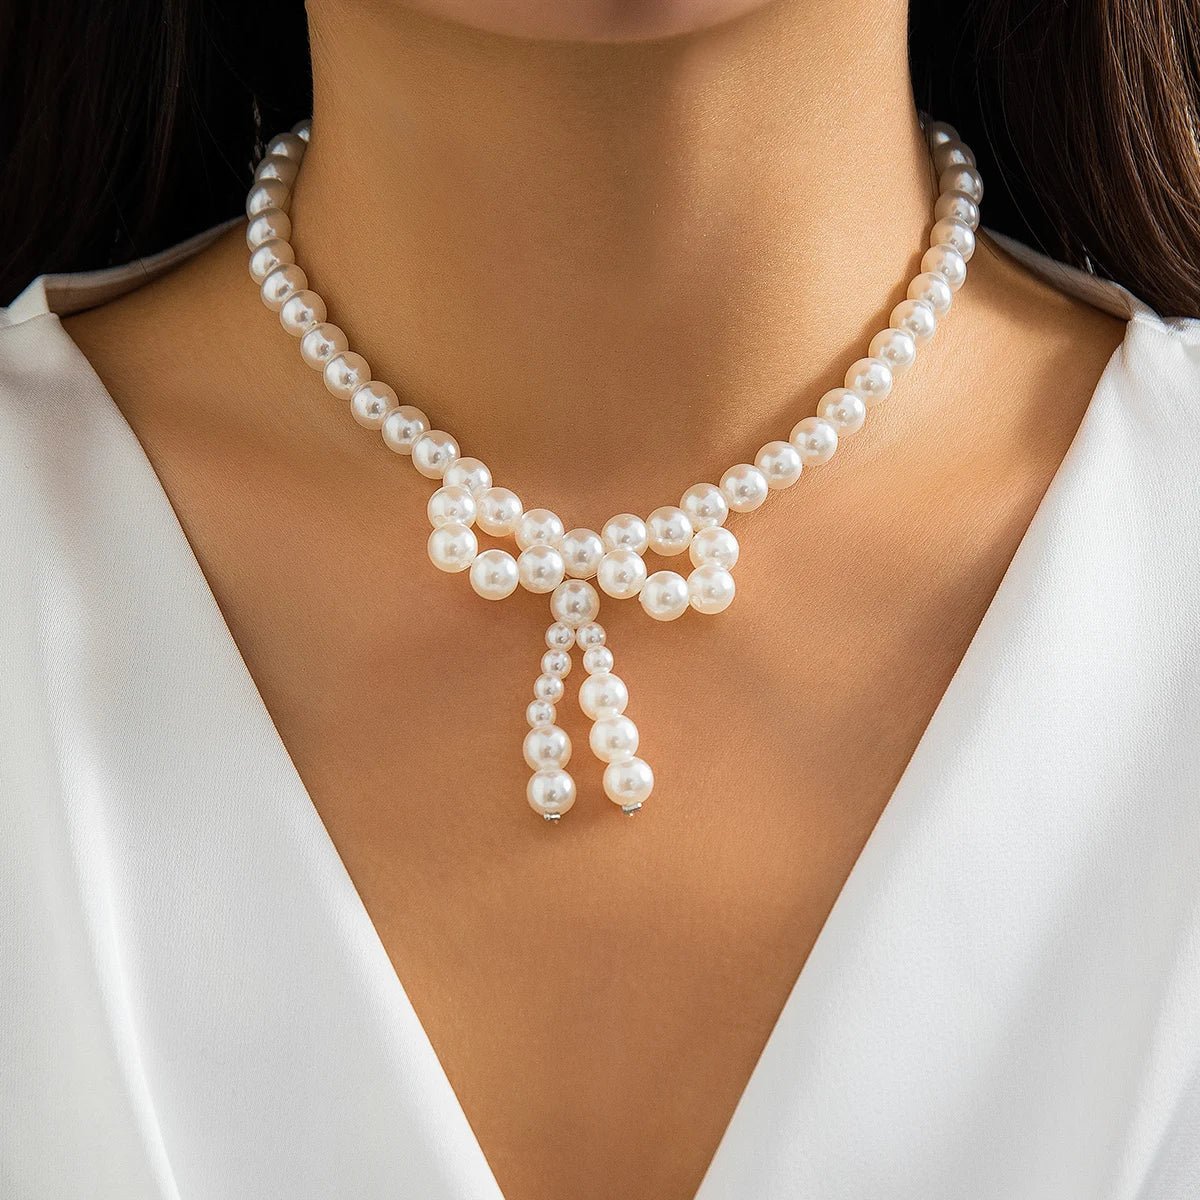 Iconic Dainty Pearl Bow Necklace - Veinci